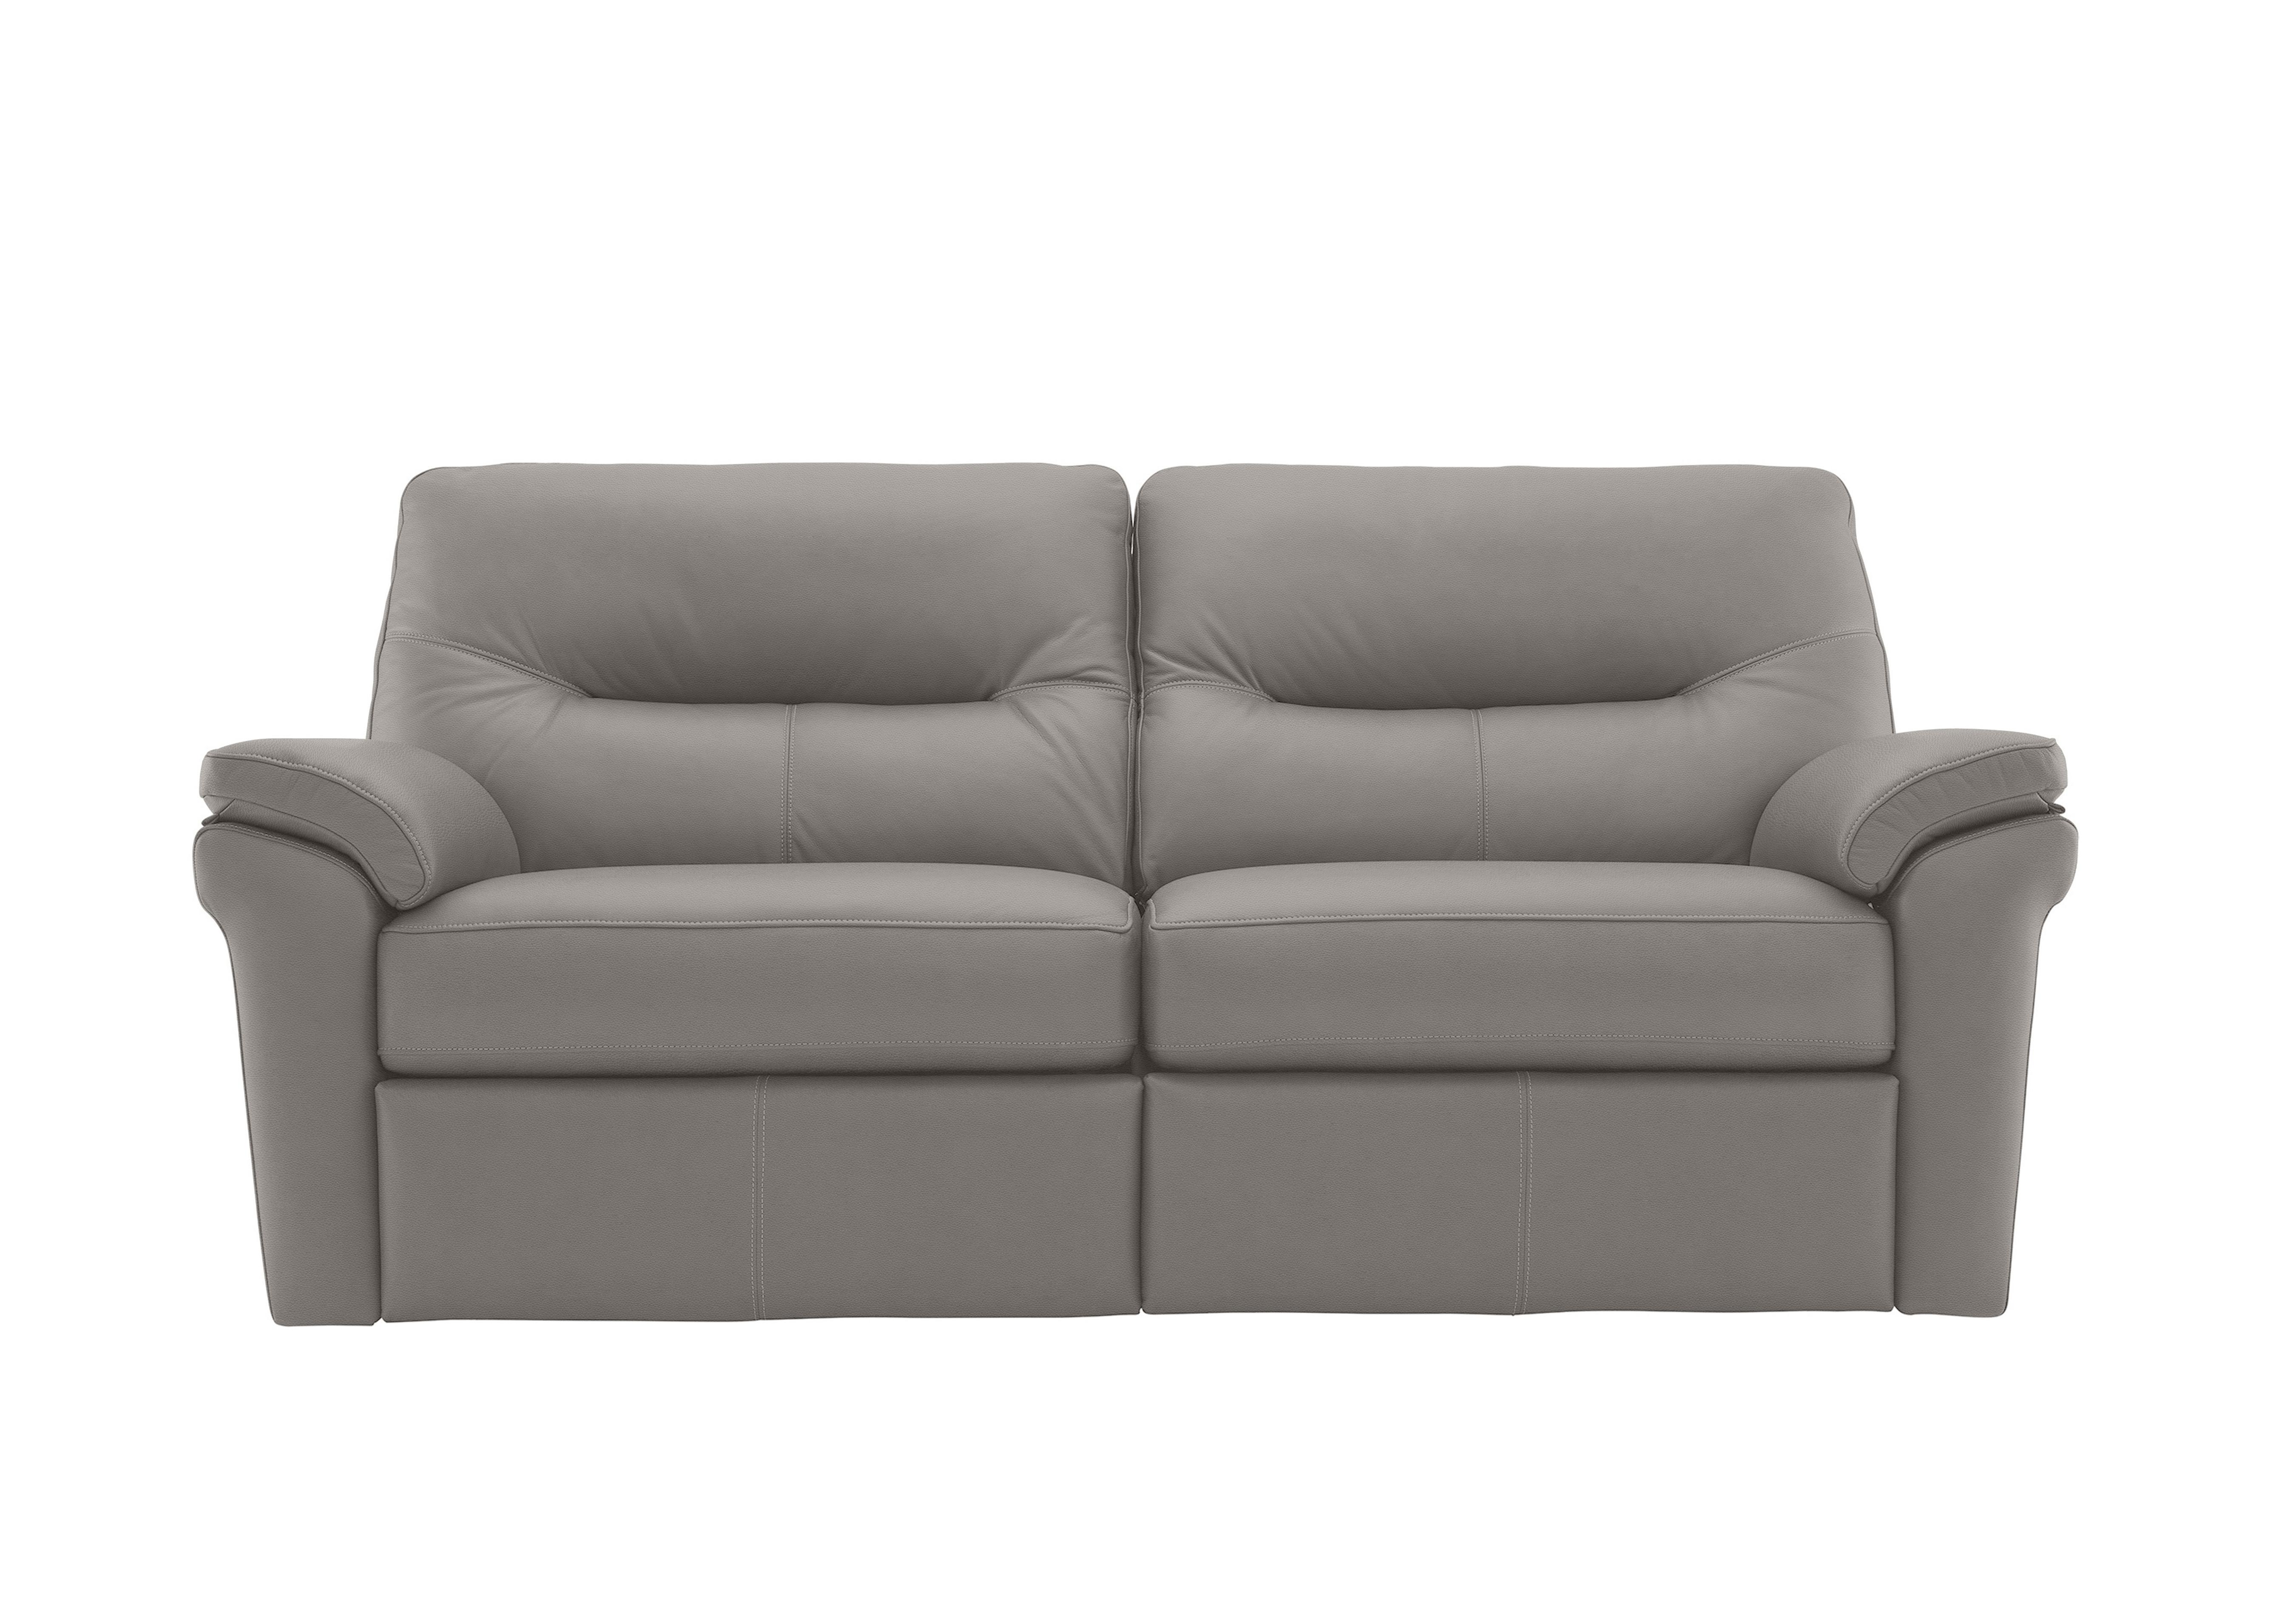 Seattle 3 Seater Leather Power Recliner Sofa with Power Lumbar in L842 Cambridge Grey on Furniture Village